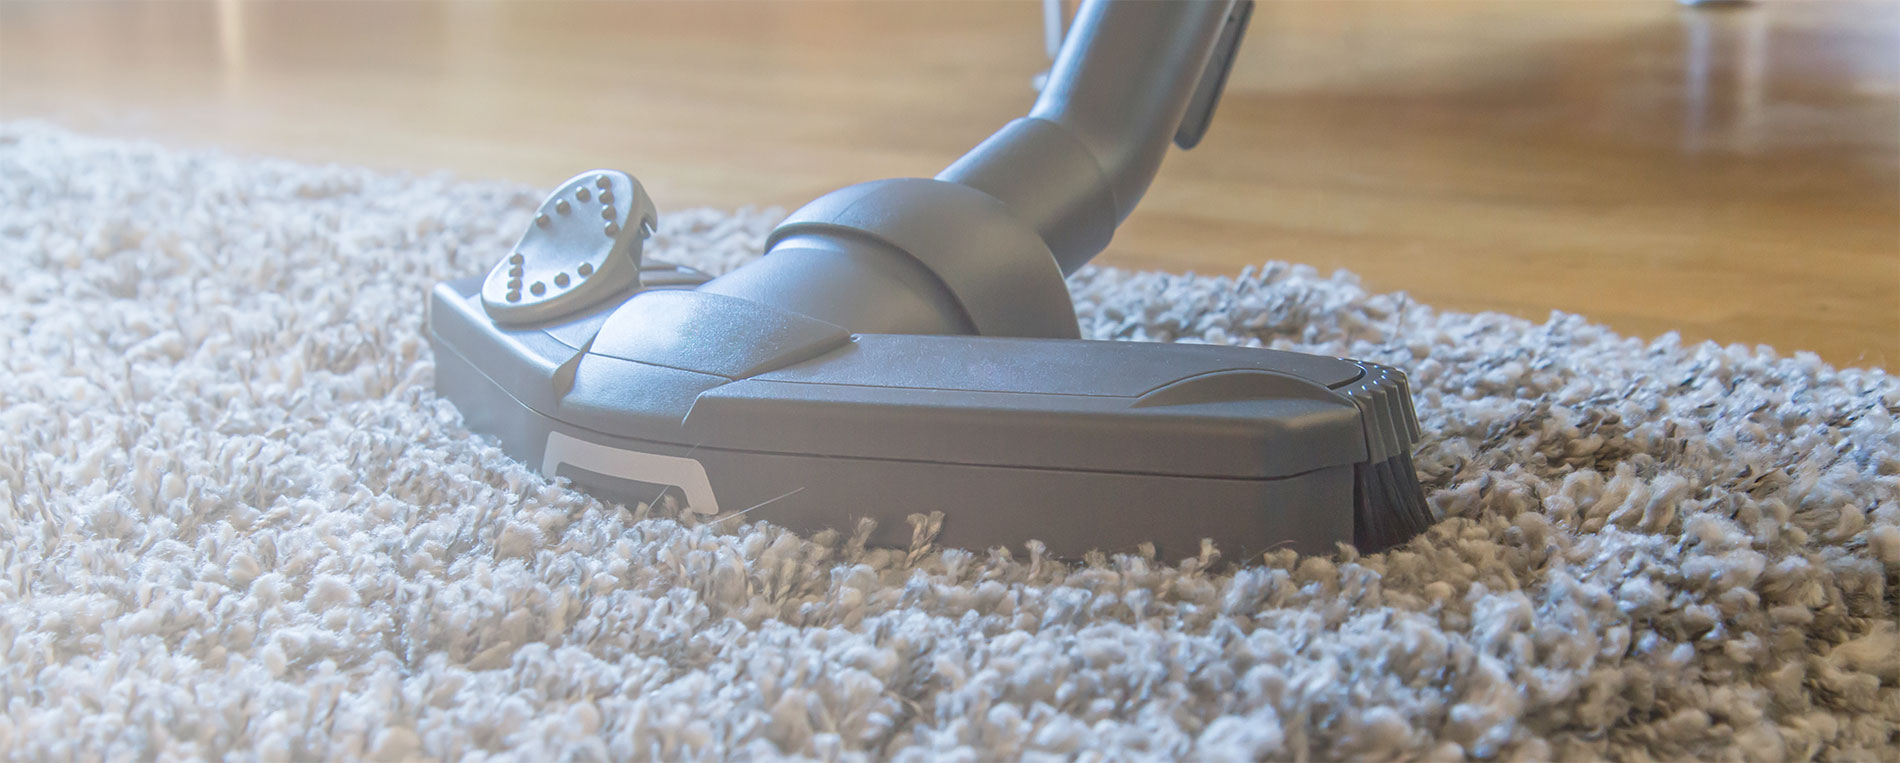 What You Should Know Before Hiring A Carpet Cleaning Company